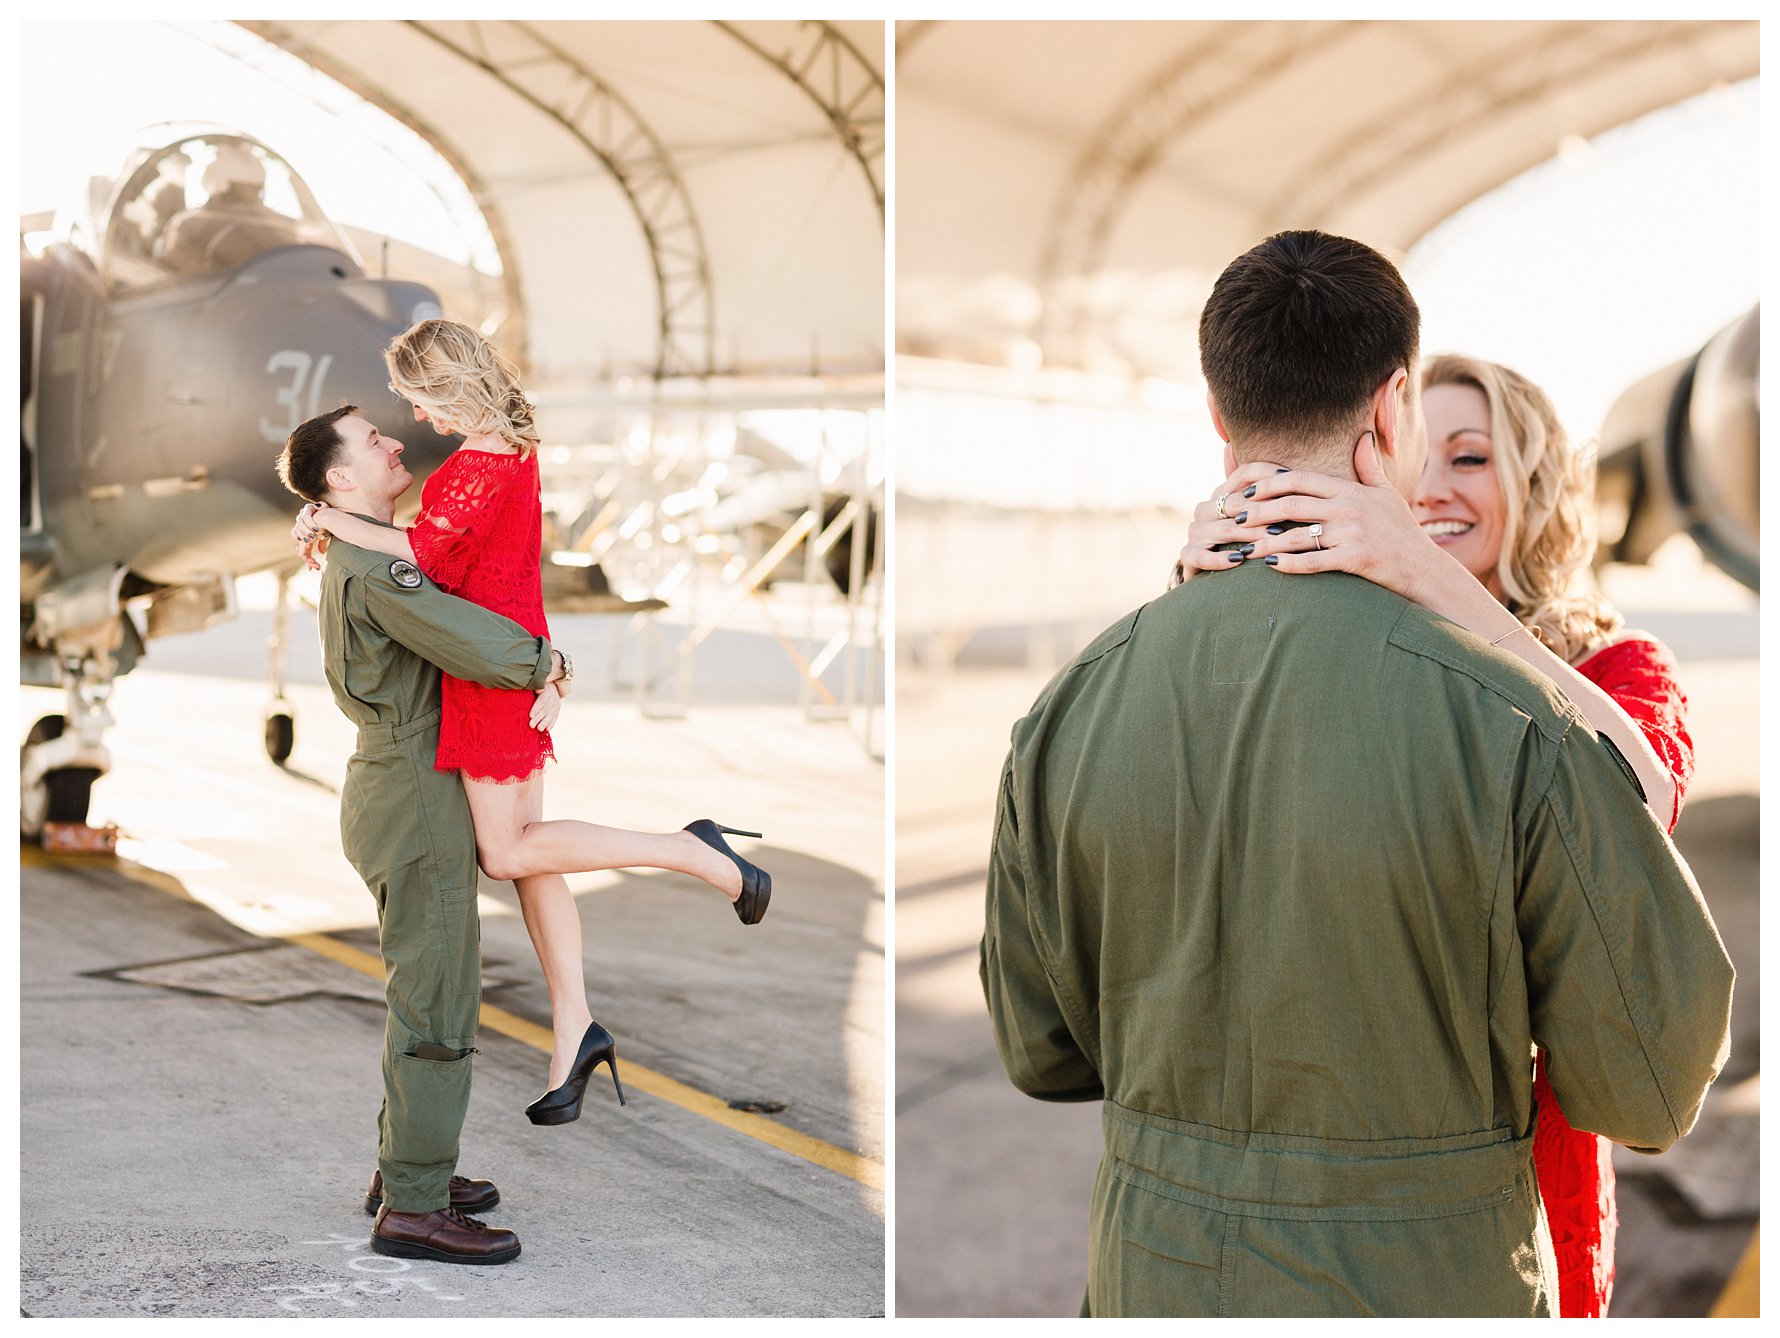 Engagement Session with Red Dress and Jets by Amanda and Grady